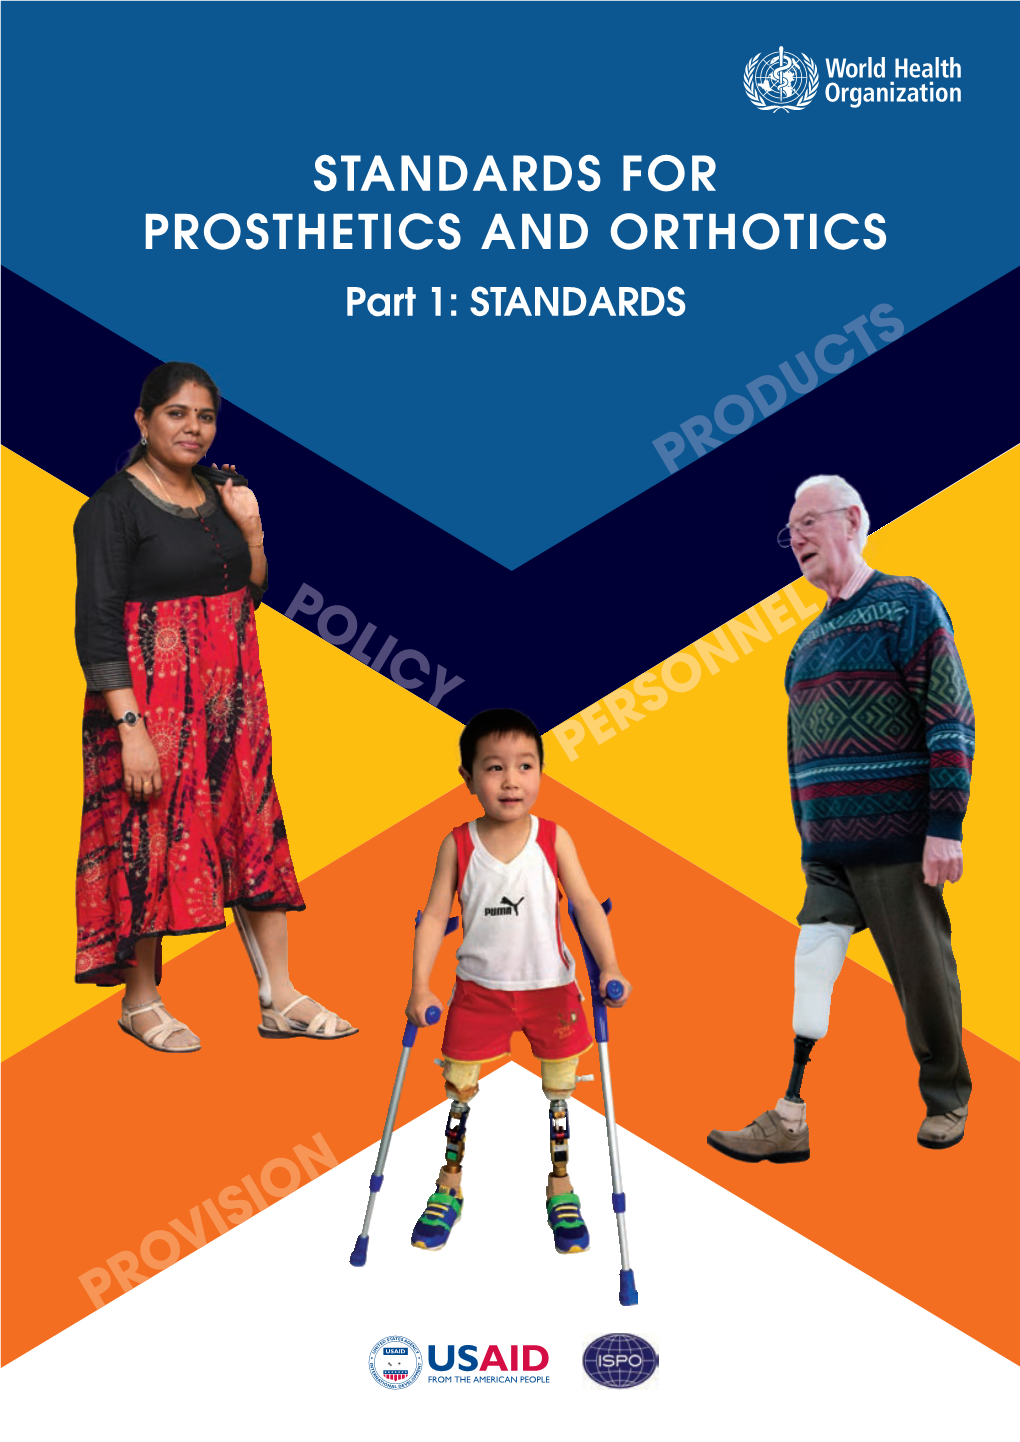 Standards for Prosthetics and Orthotics, Part 1